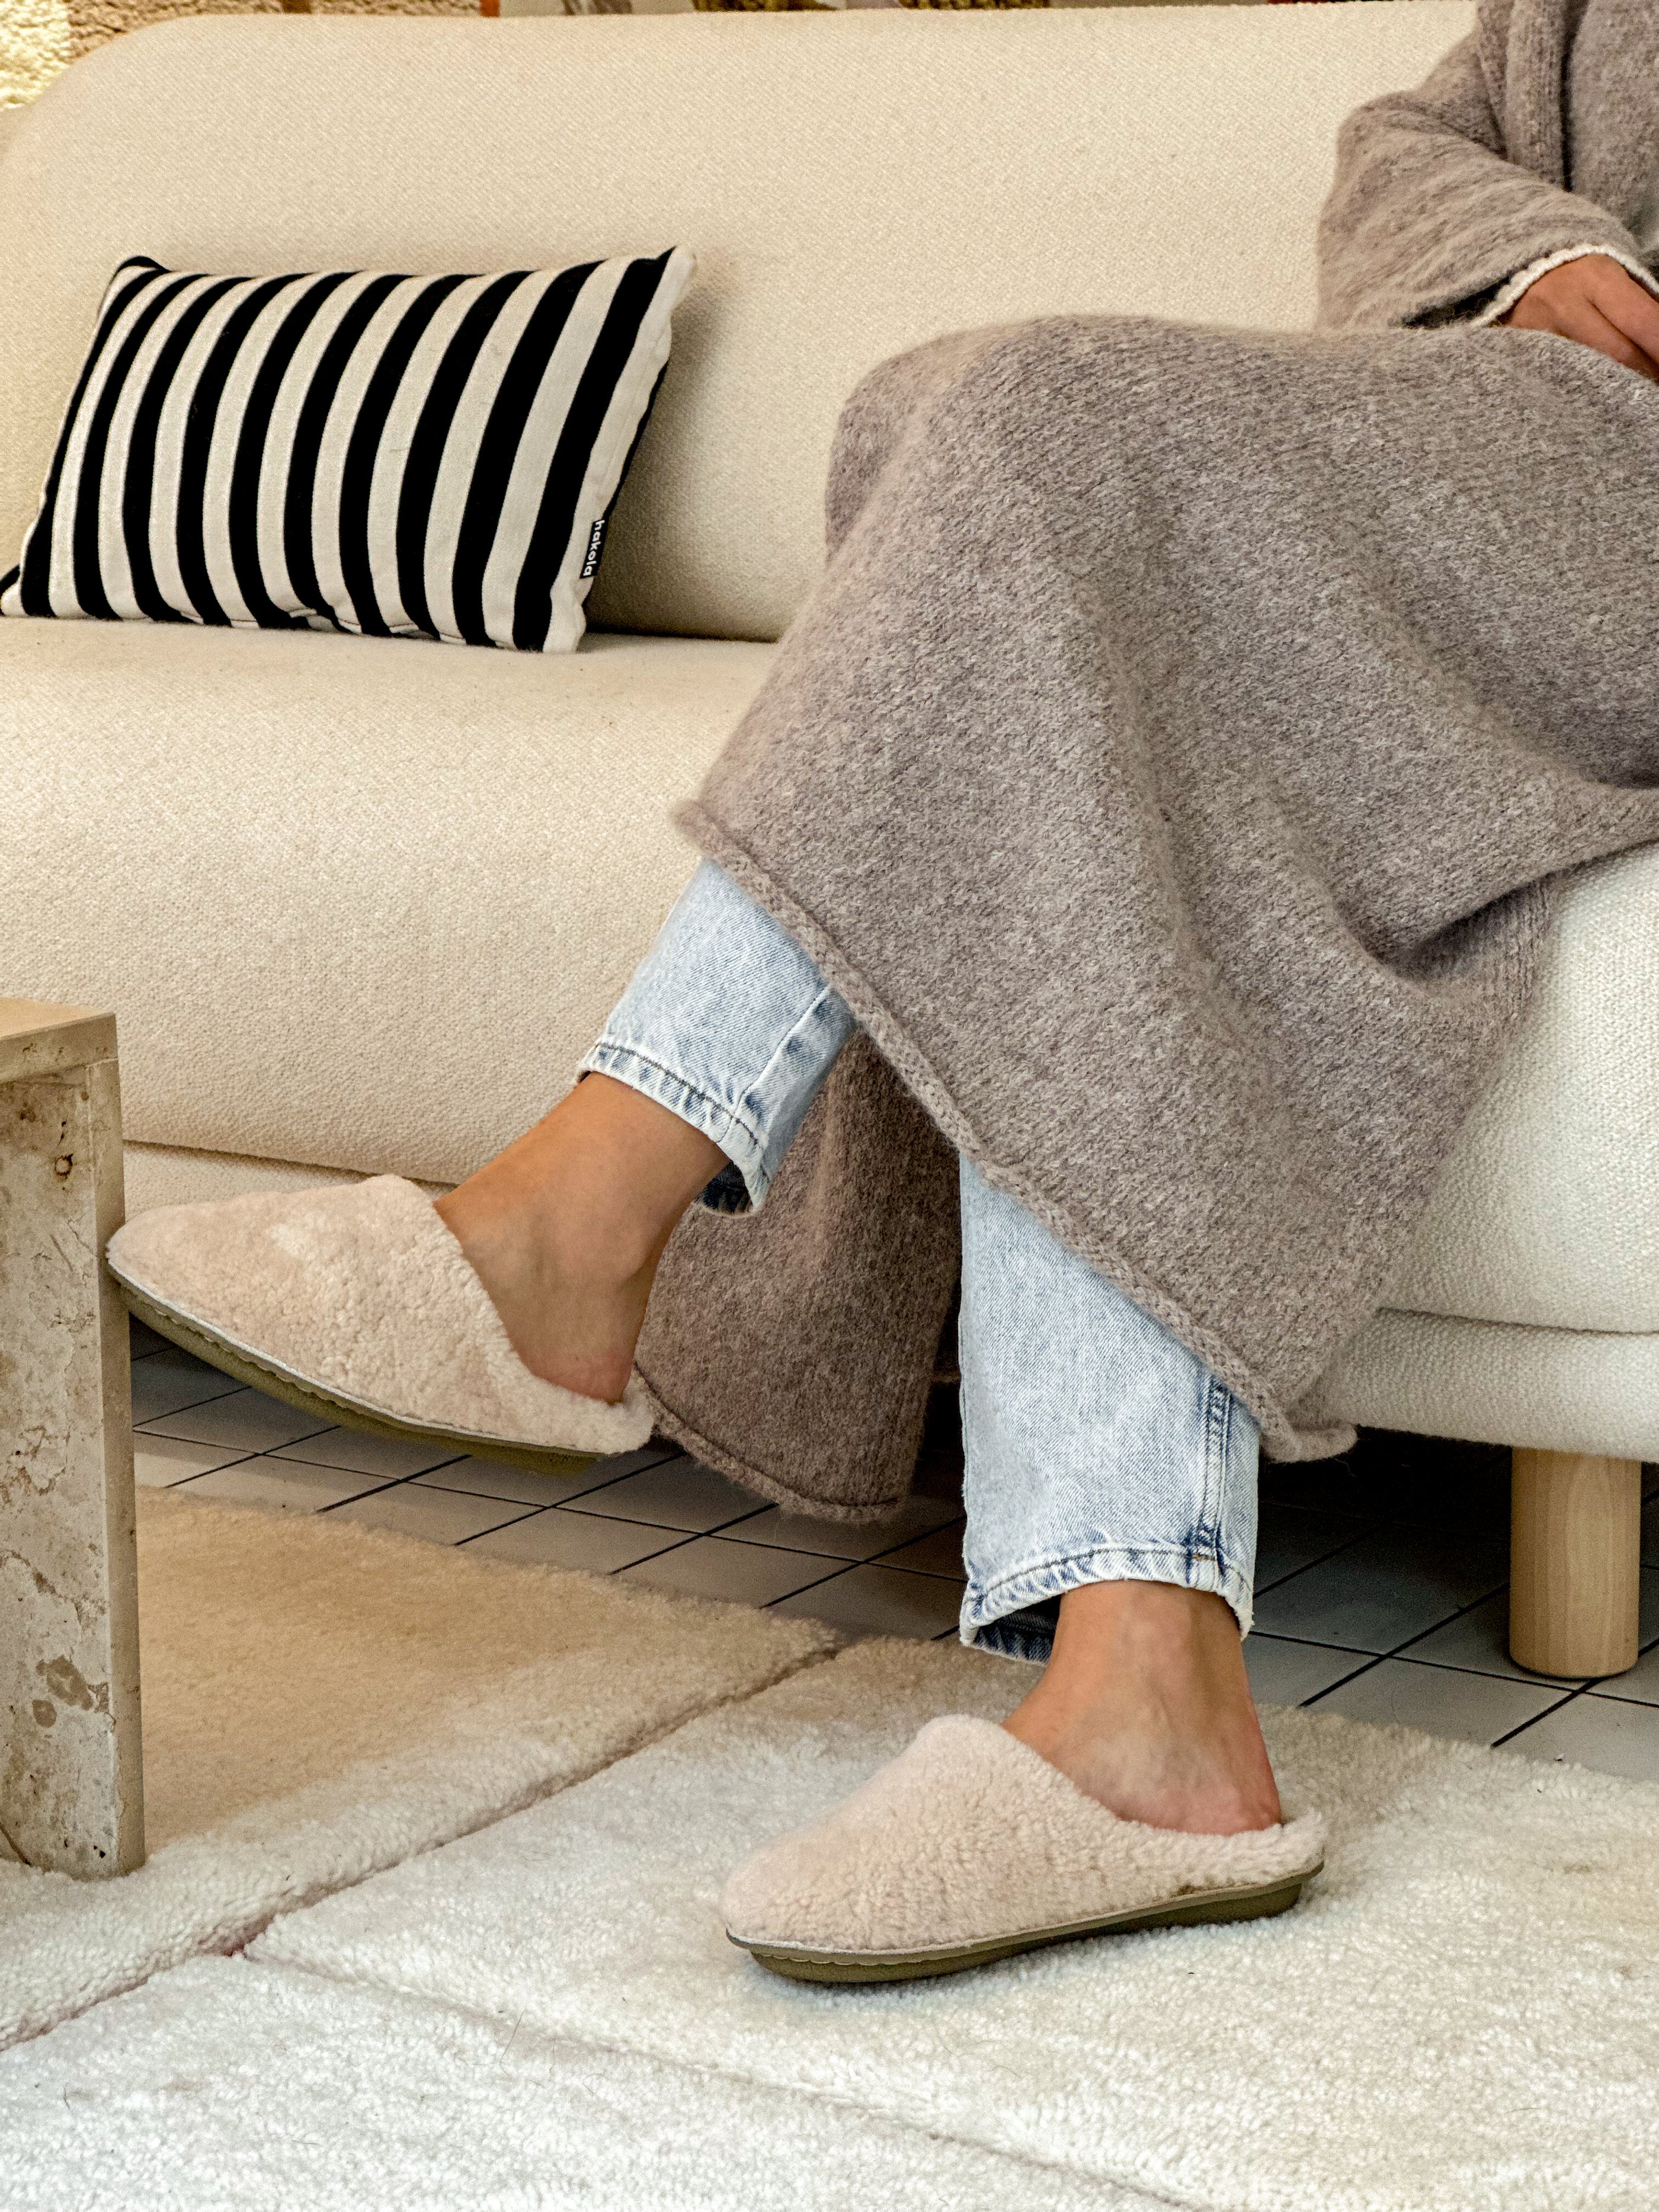 Wool slippers that really are heaven for your feet